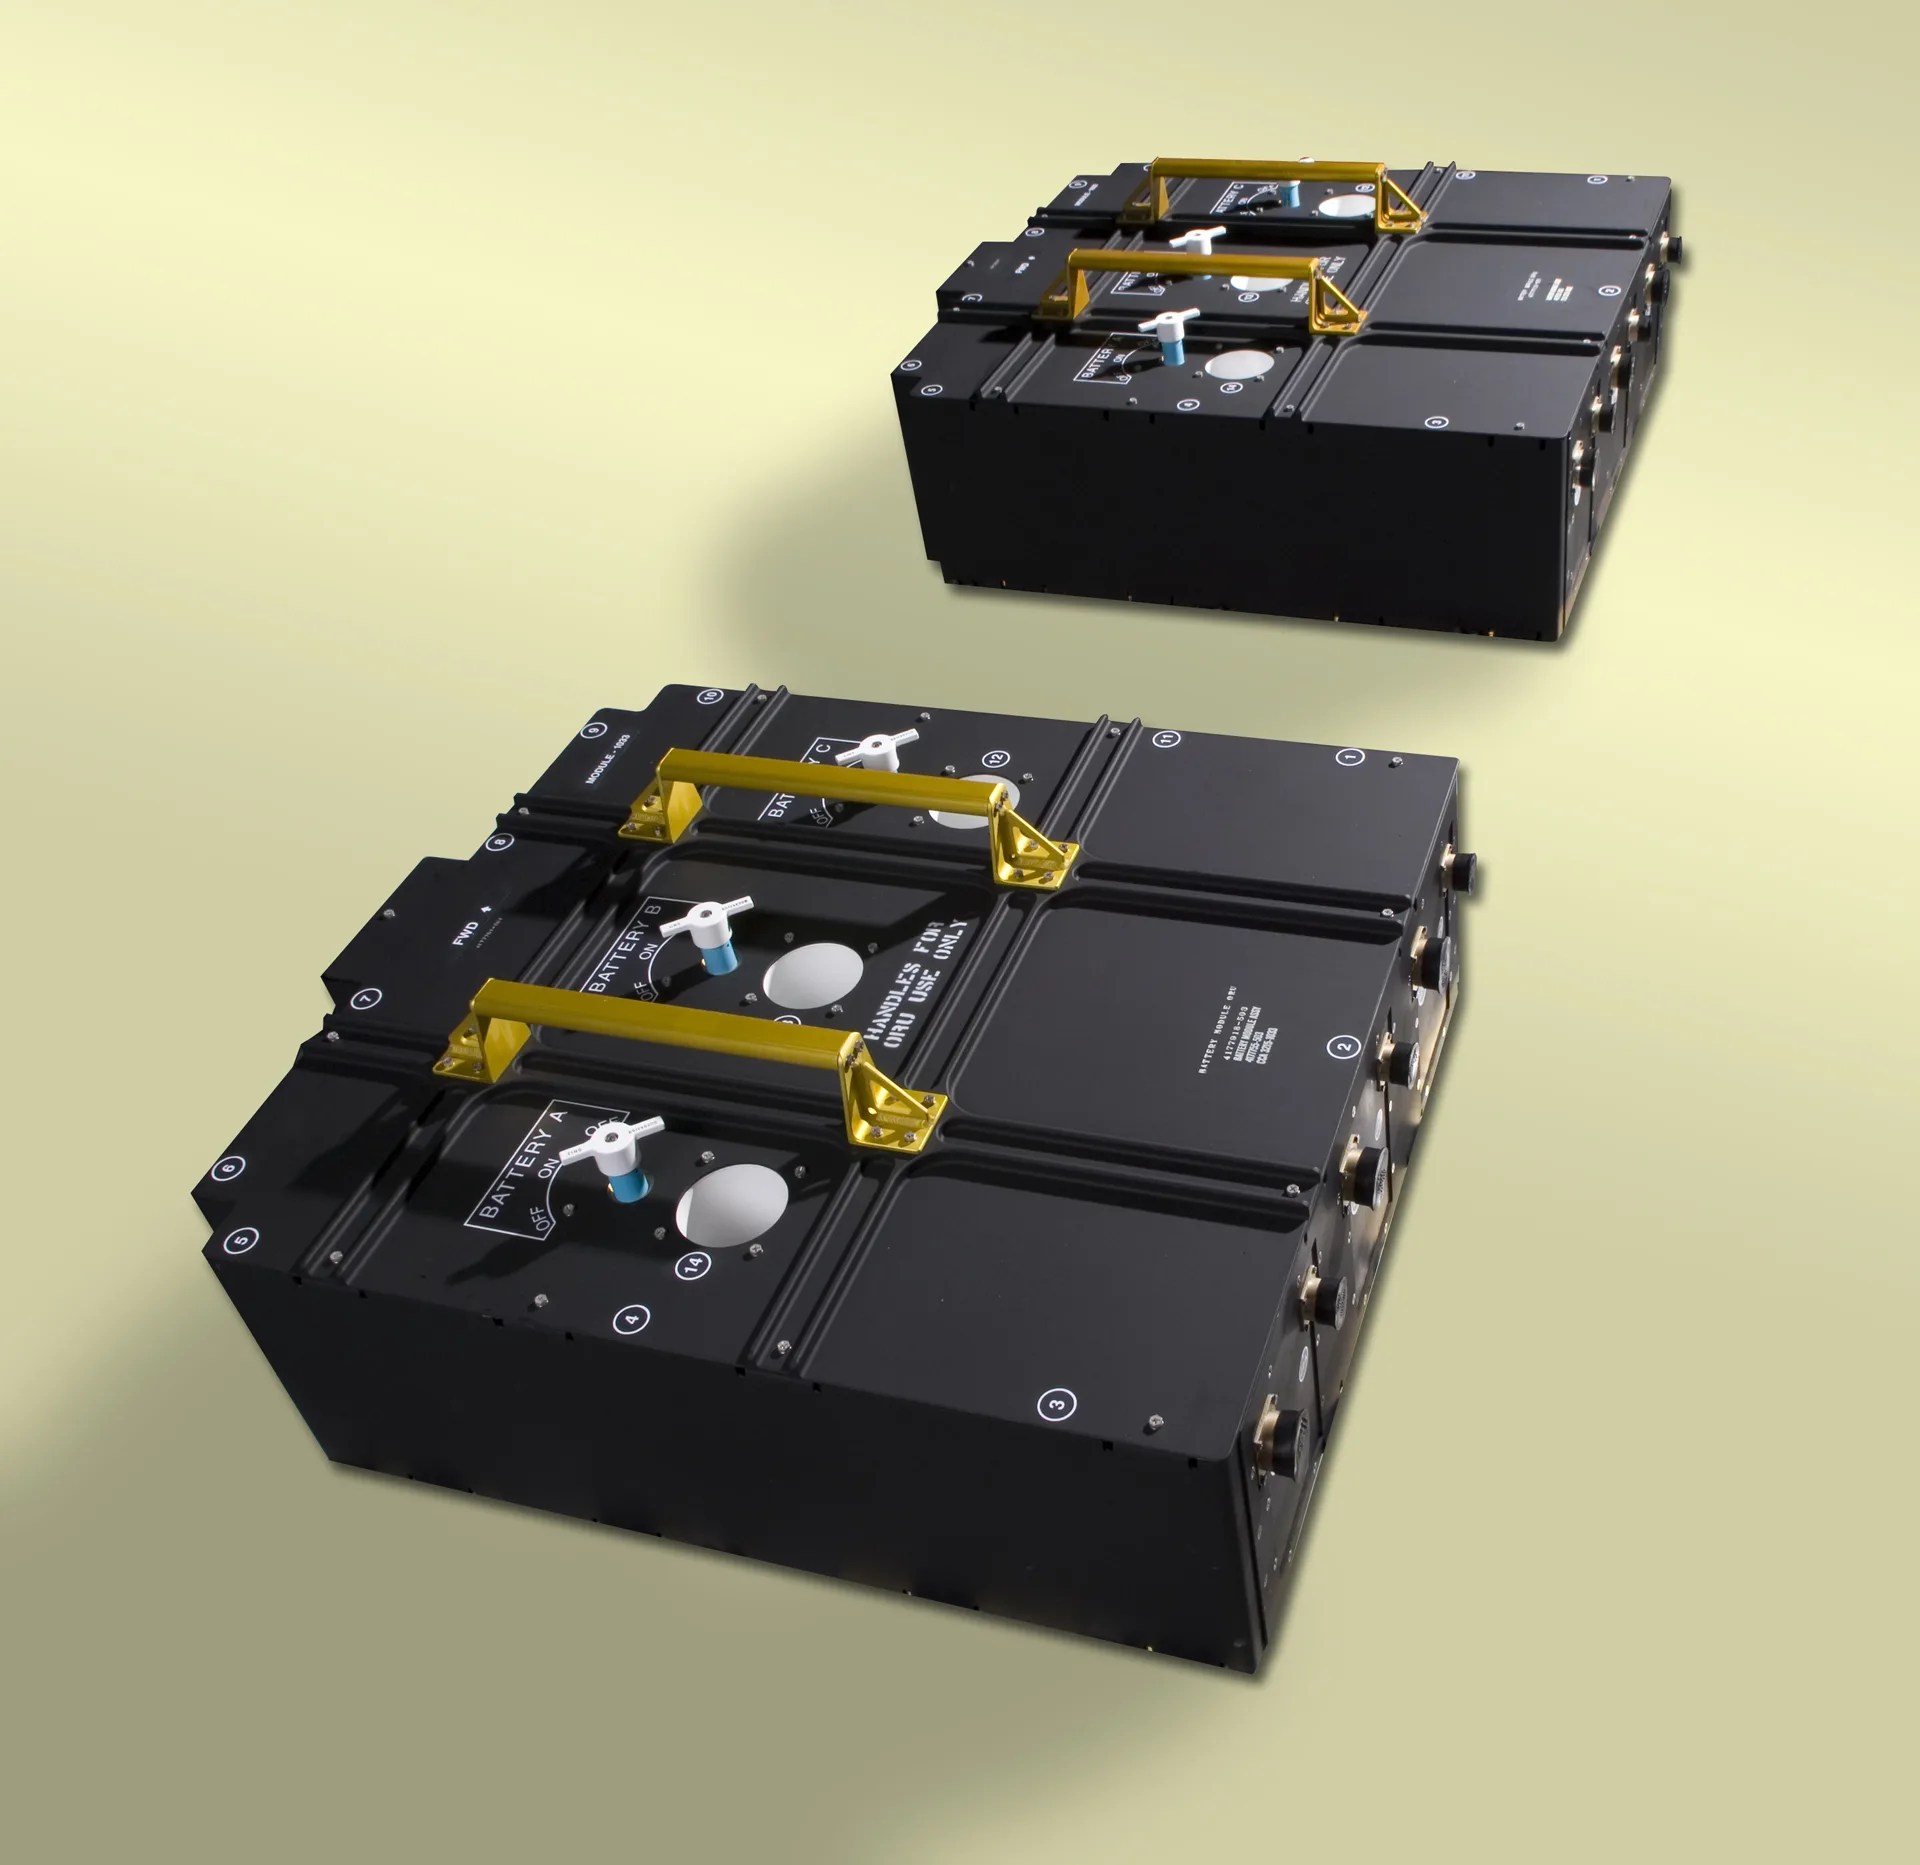 Two battery modules containing 3 batteries each destined for Hubble